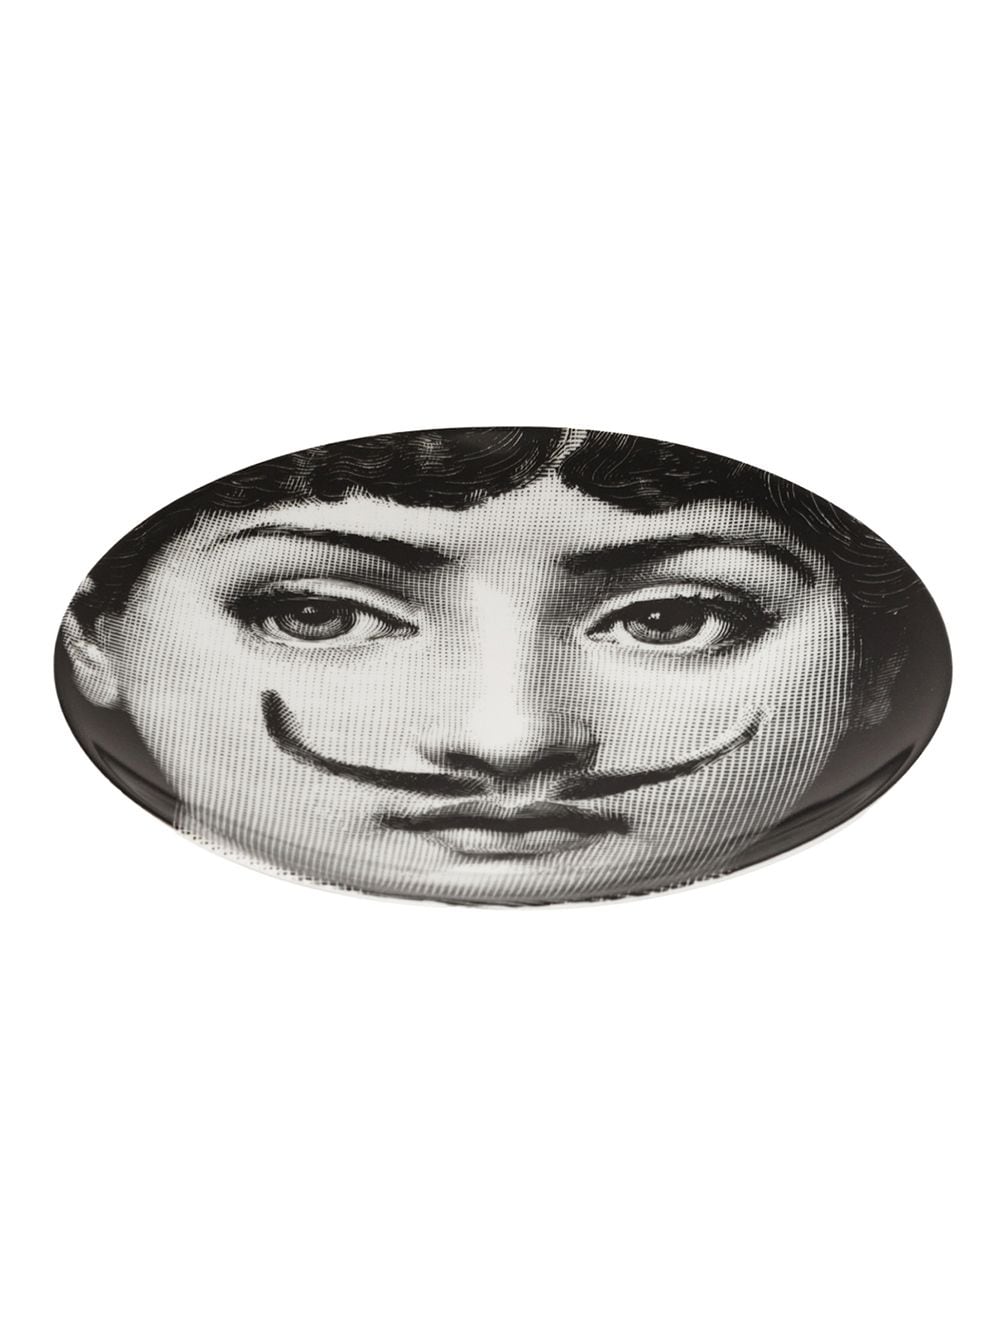 Image 2 of Fornasetti plate